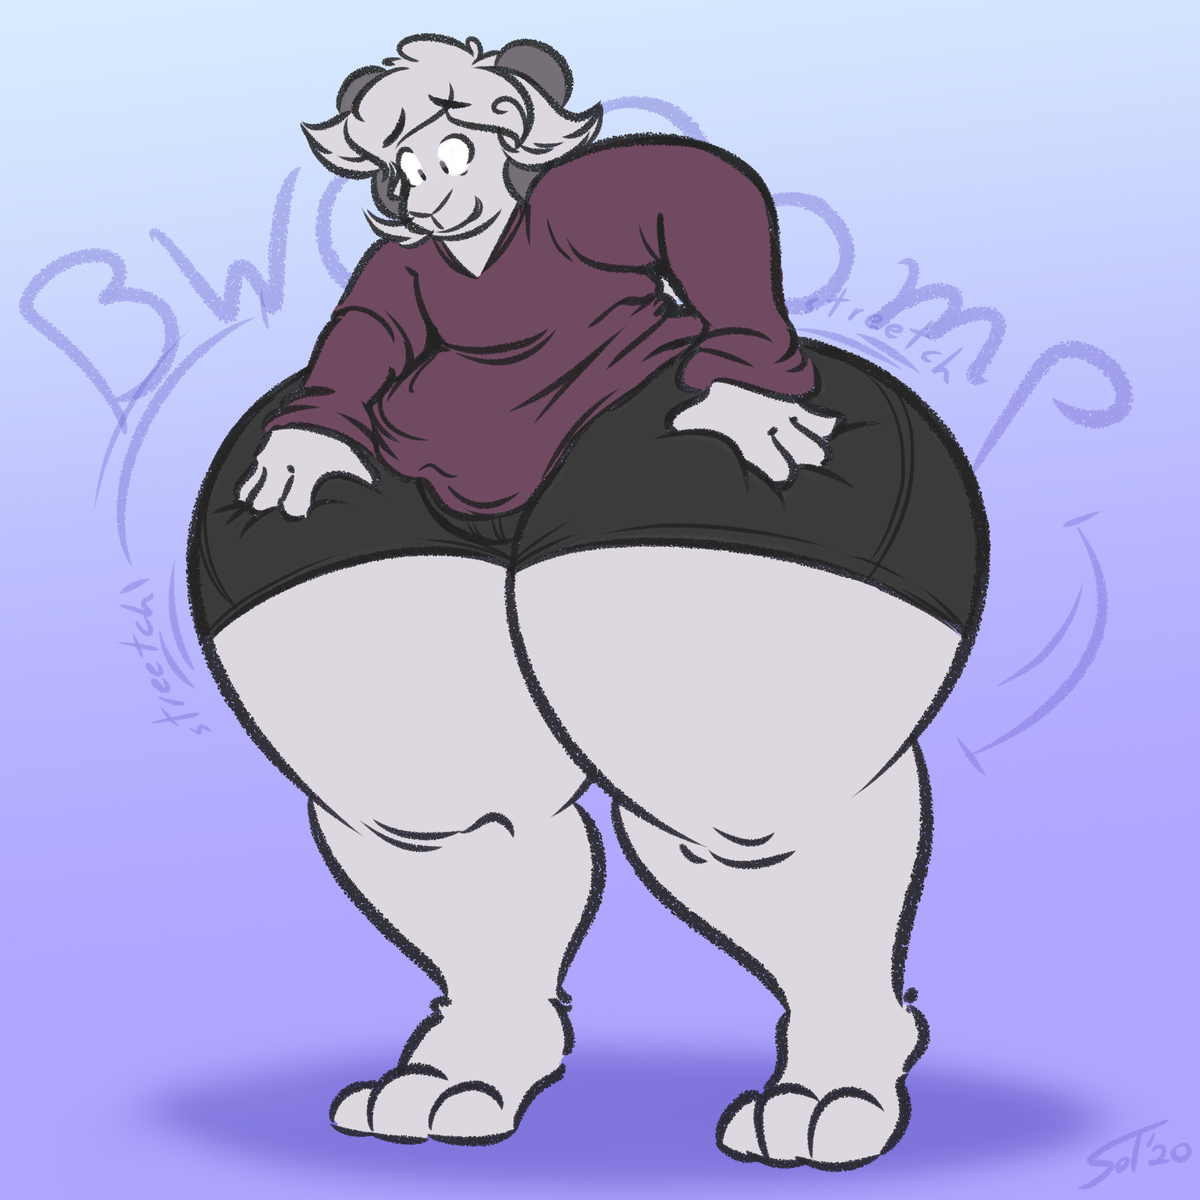 streeetch! 𝐁𝐖𝐎𝐎𝐎𝐌𝐏! creeeak! im a thicc wide goat 👀💦 by @sotnsot